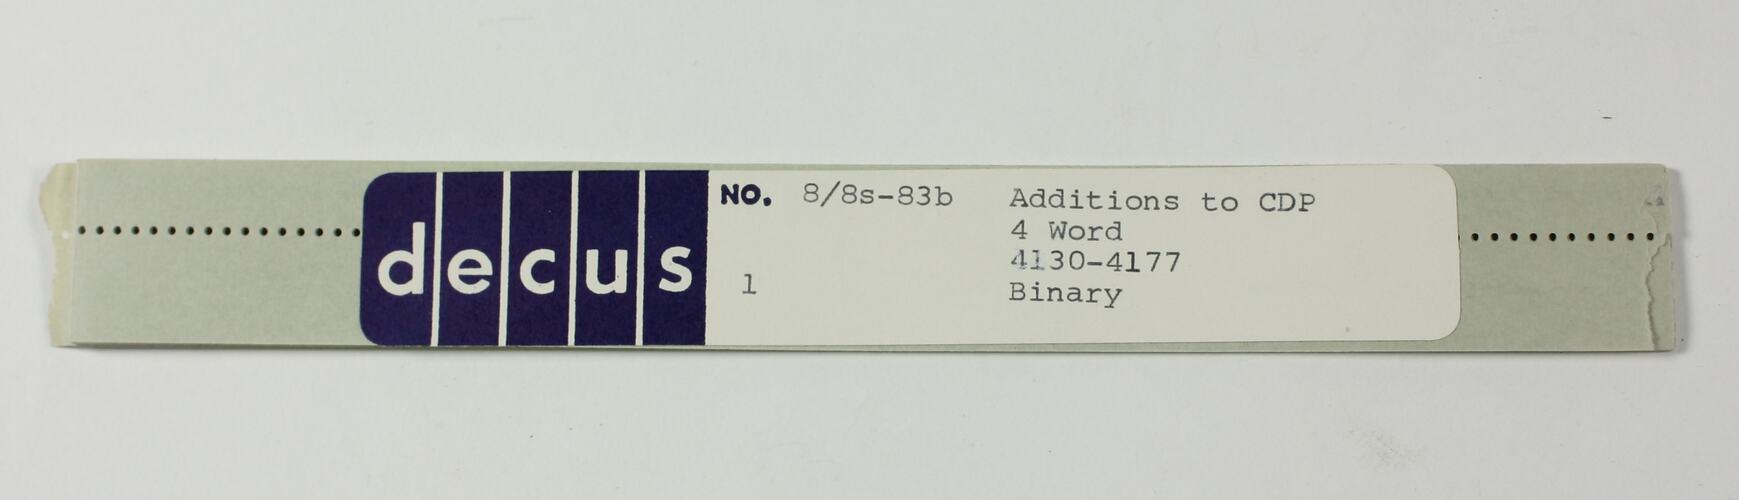 Paper Tape - DECUS, '8/8s-83b Additions to CDP, 4 Word, 4130-4177, Binary'